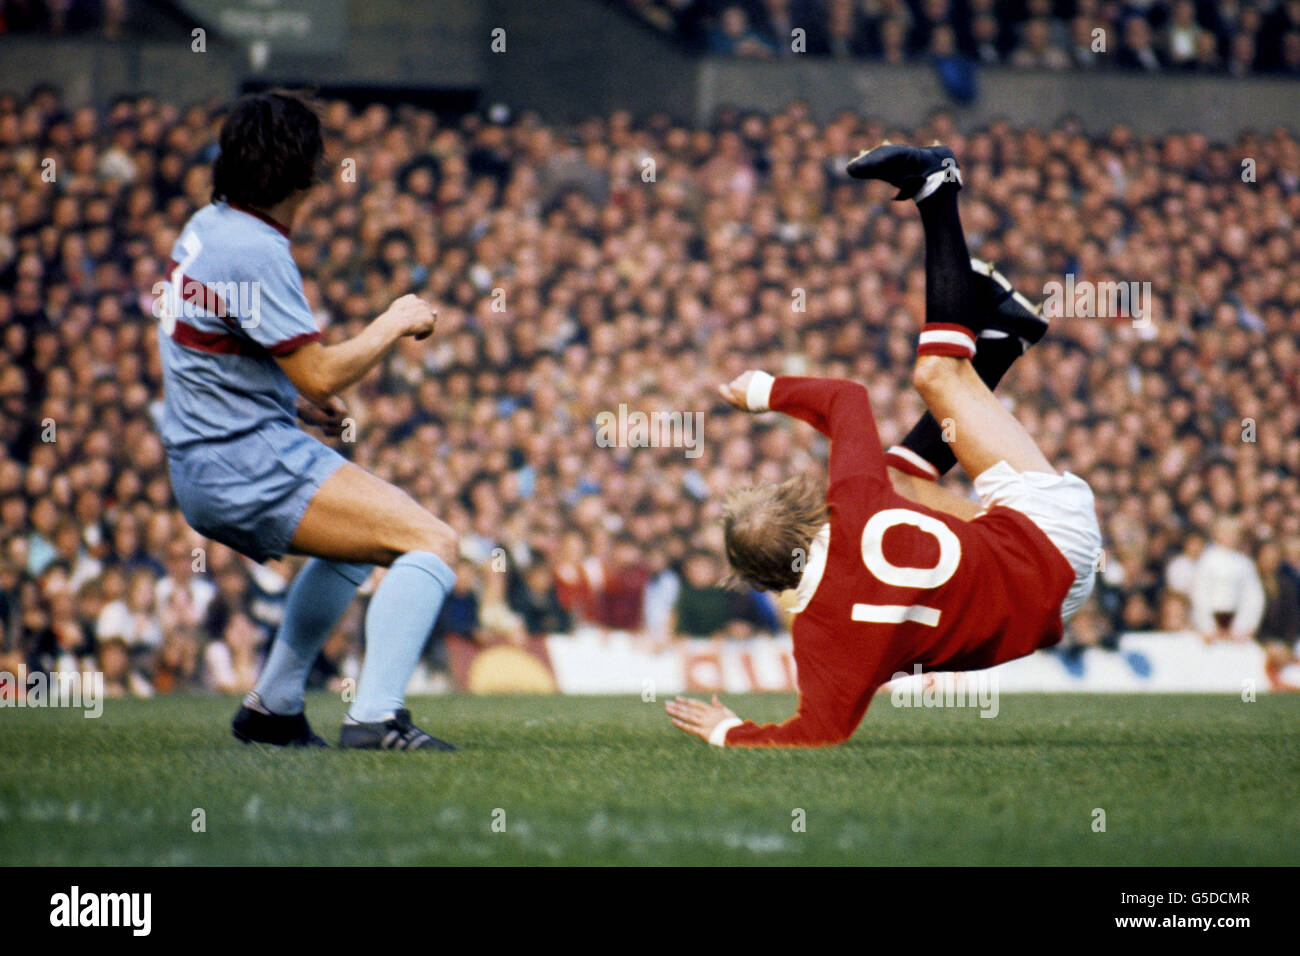 Soccer - Football League Division One - Manchester United v West Ham United. Denis Law, Manchester United Stock Photo